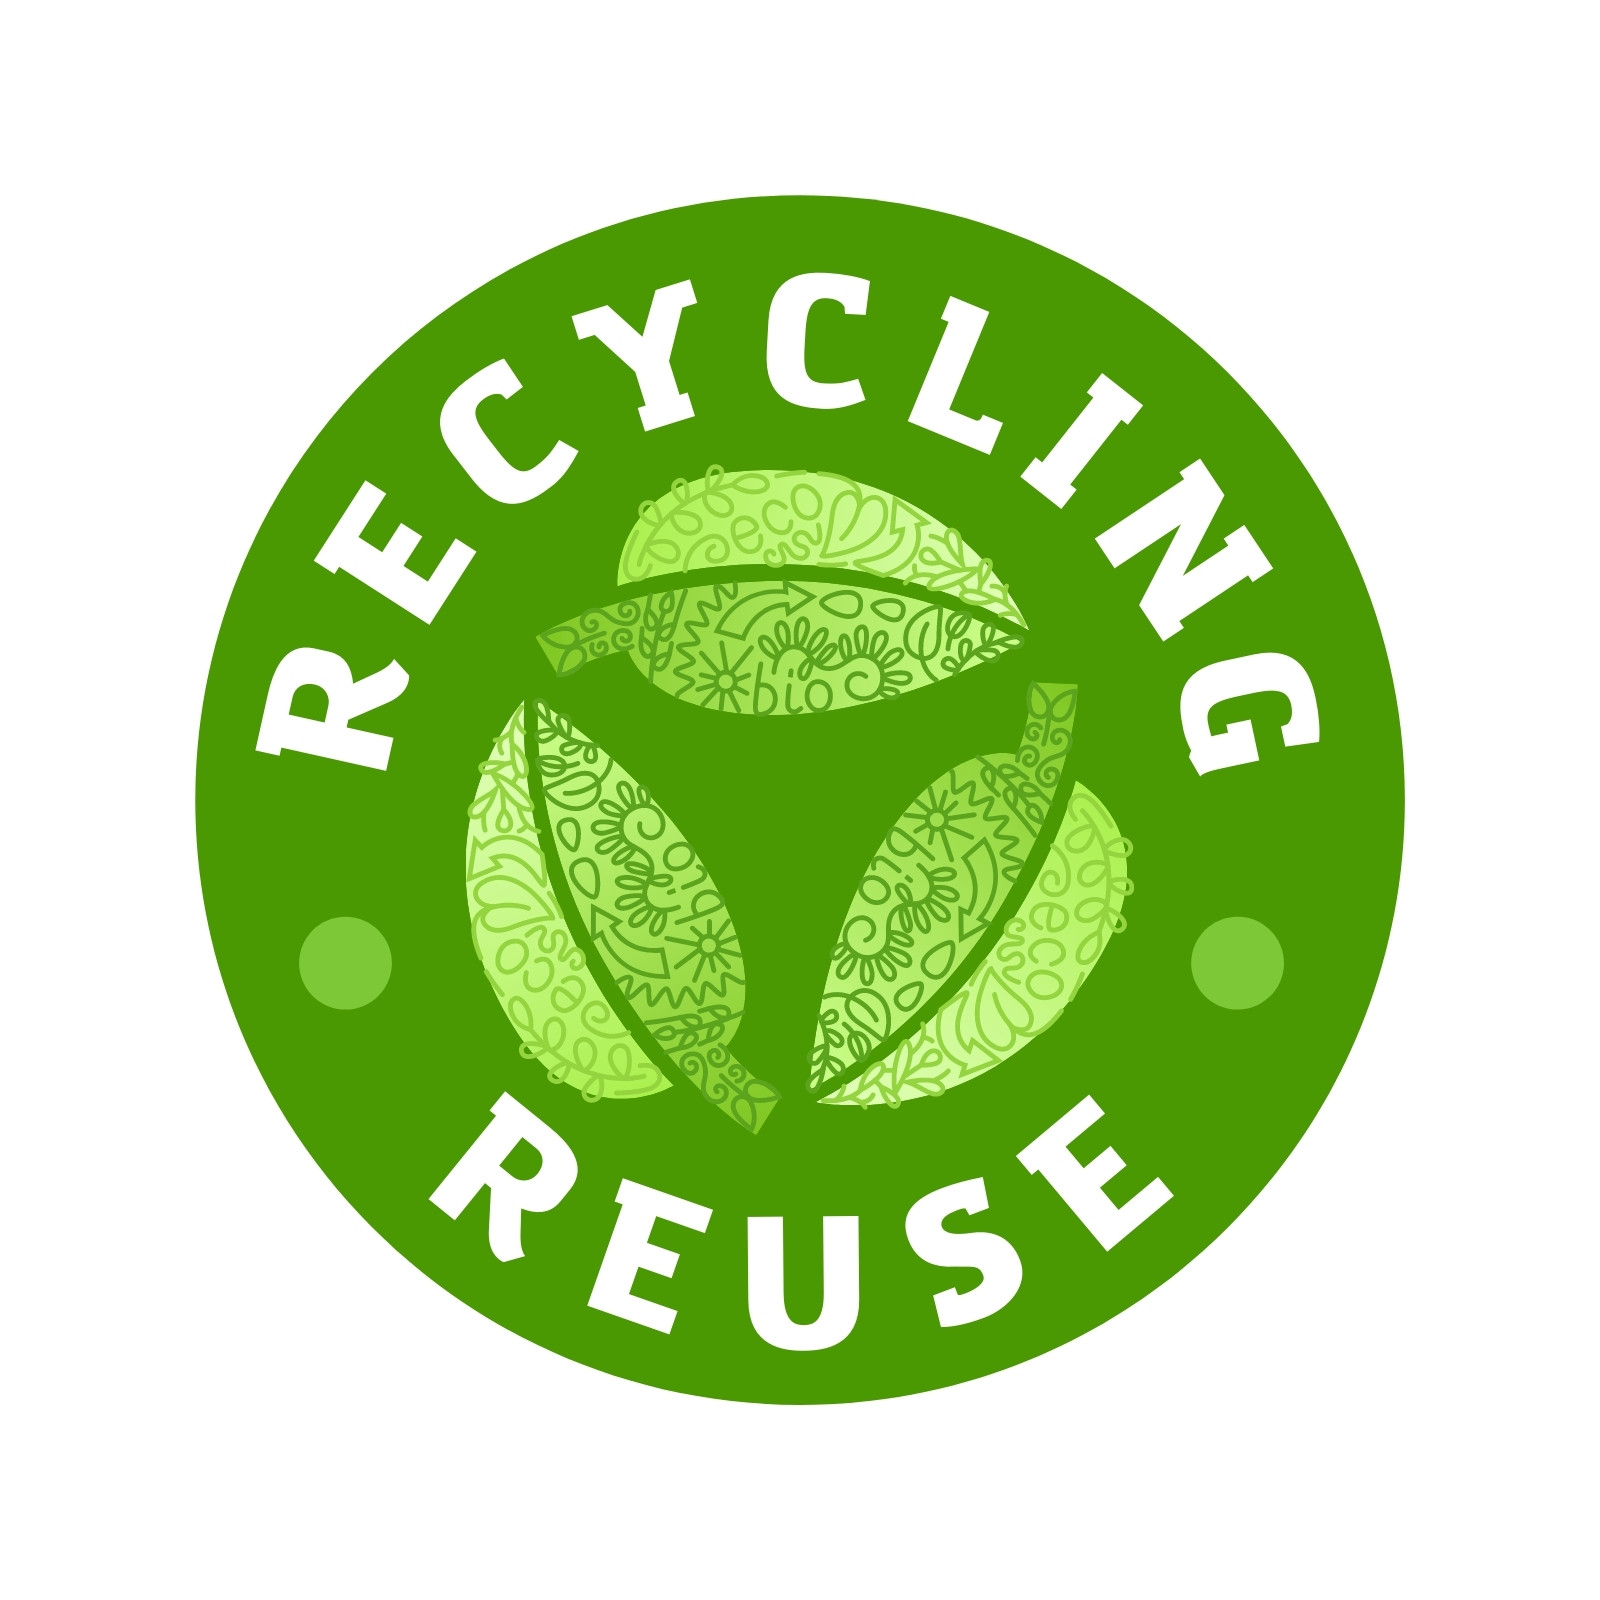 Recycle Reuse And Reduce Label Zero Waste Symbol Reuse Cycle Recycling  Symbol Environmental Protection Sign Ecological Symbol Stock Illustration -  Download Image Now - iStock